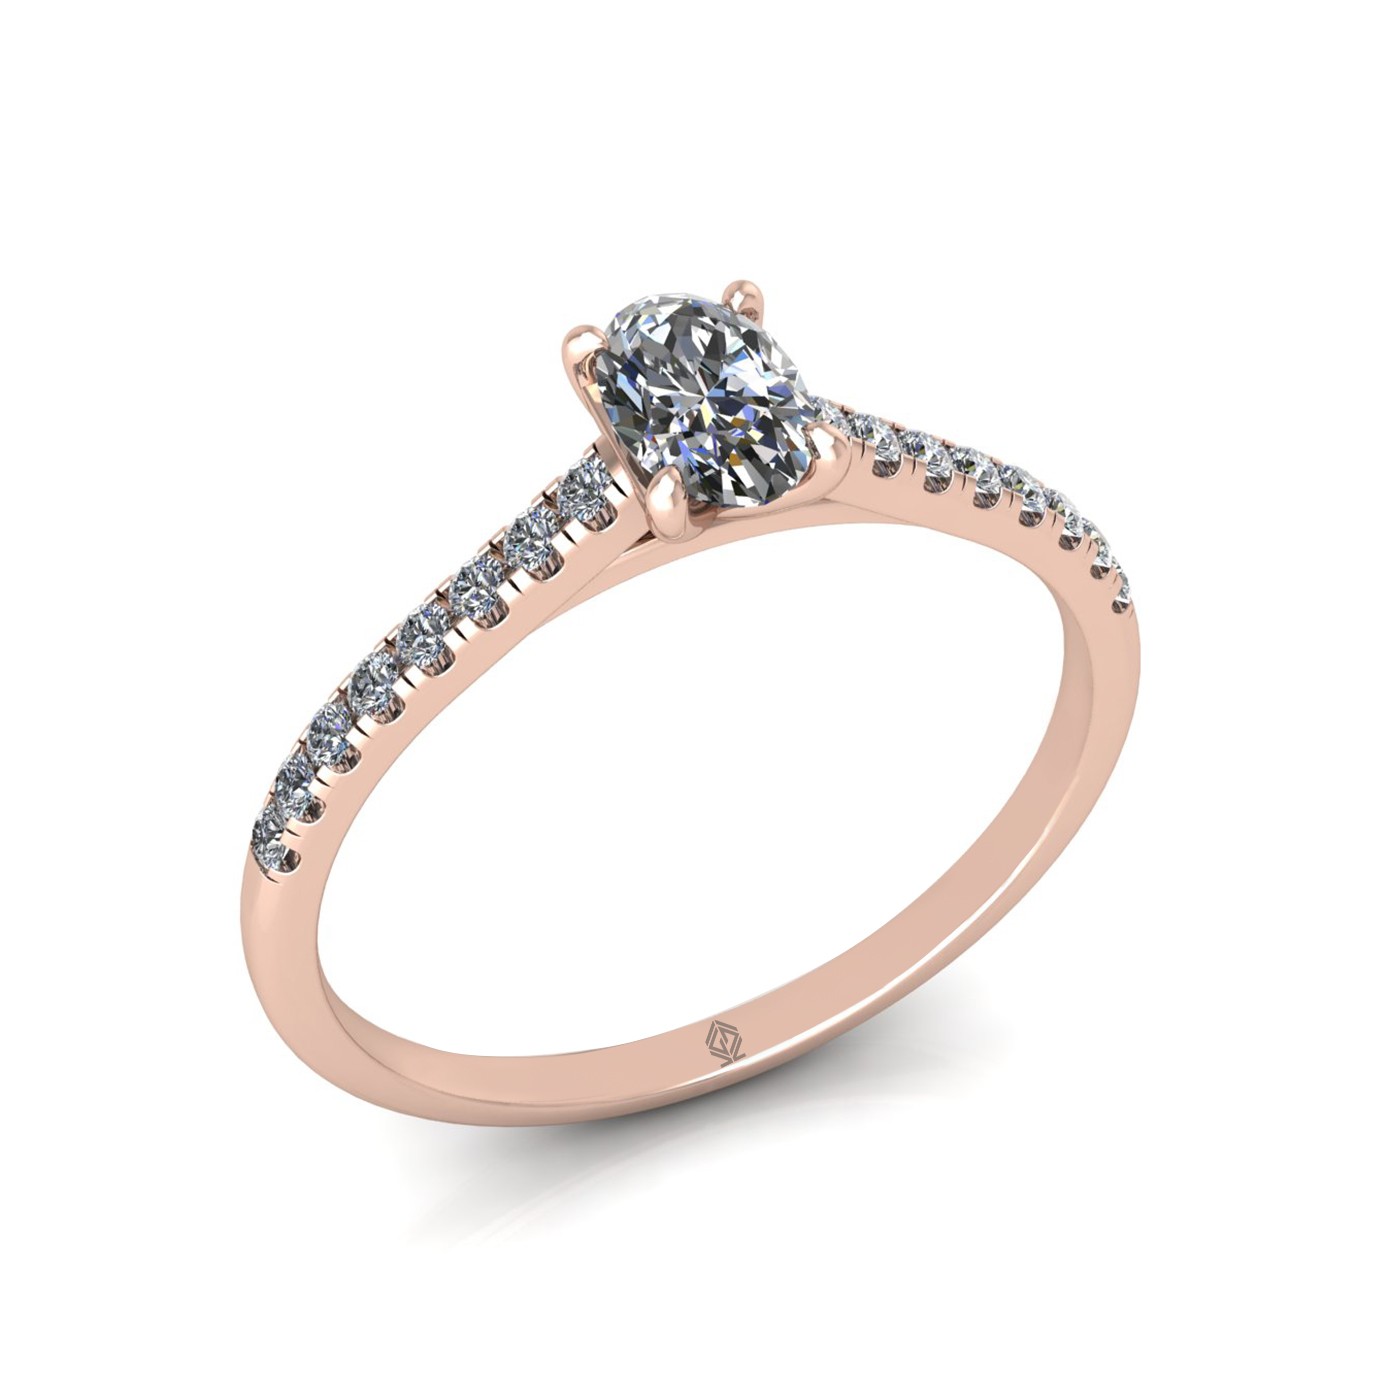 18k rose gold  0,30 ct 4 prongs oval cut diamond engagement ring with whisper thin pavÉ set band Photos & images